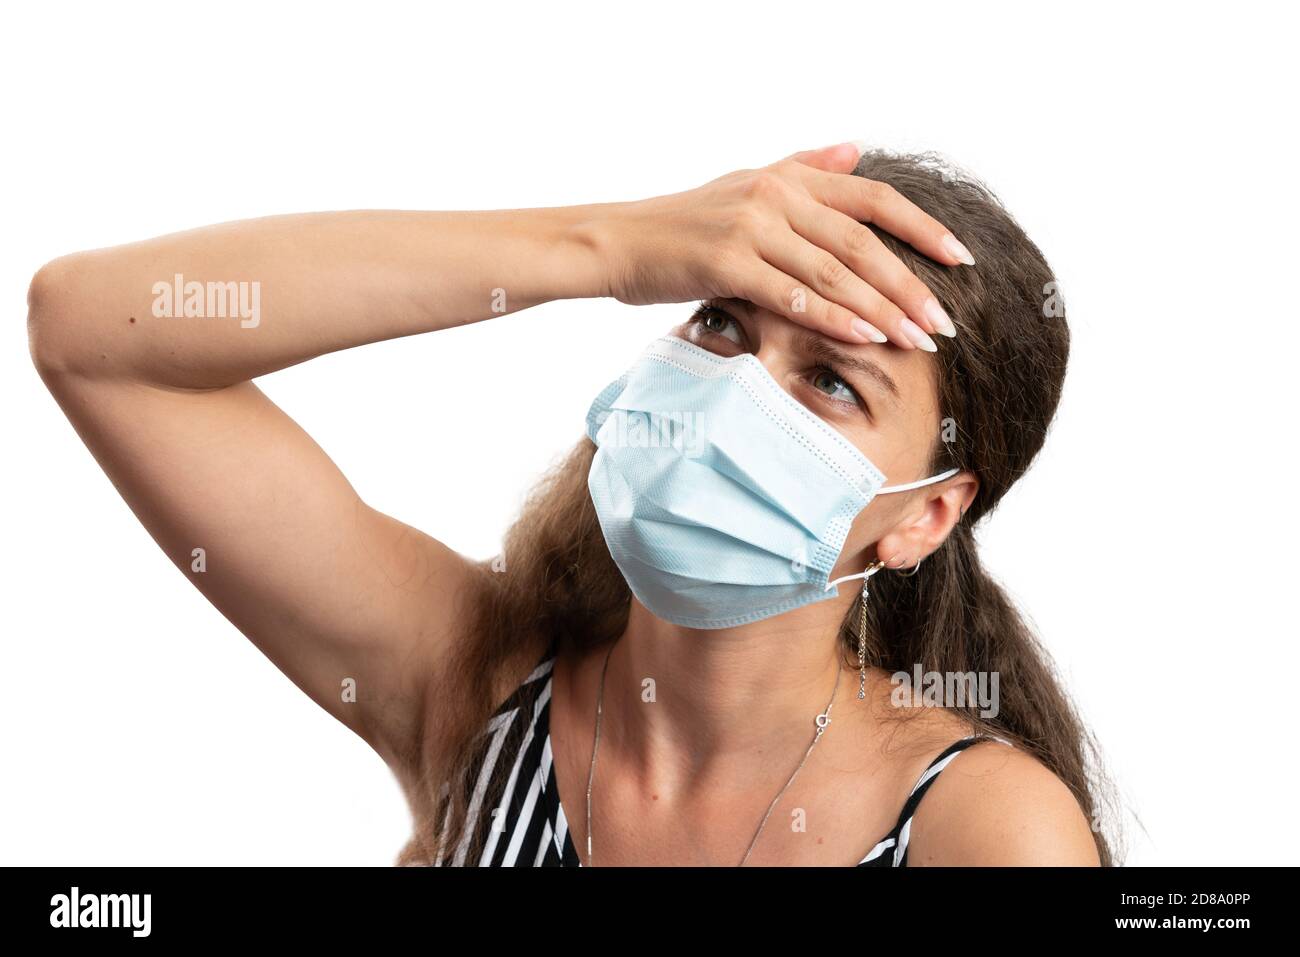 Adult woman touching forehead as high fever body temperature sars covid19 influenza cold flu symptom concept with medical mask covering nose and mouth Stock Photo